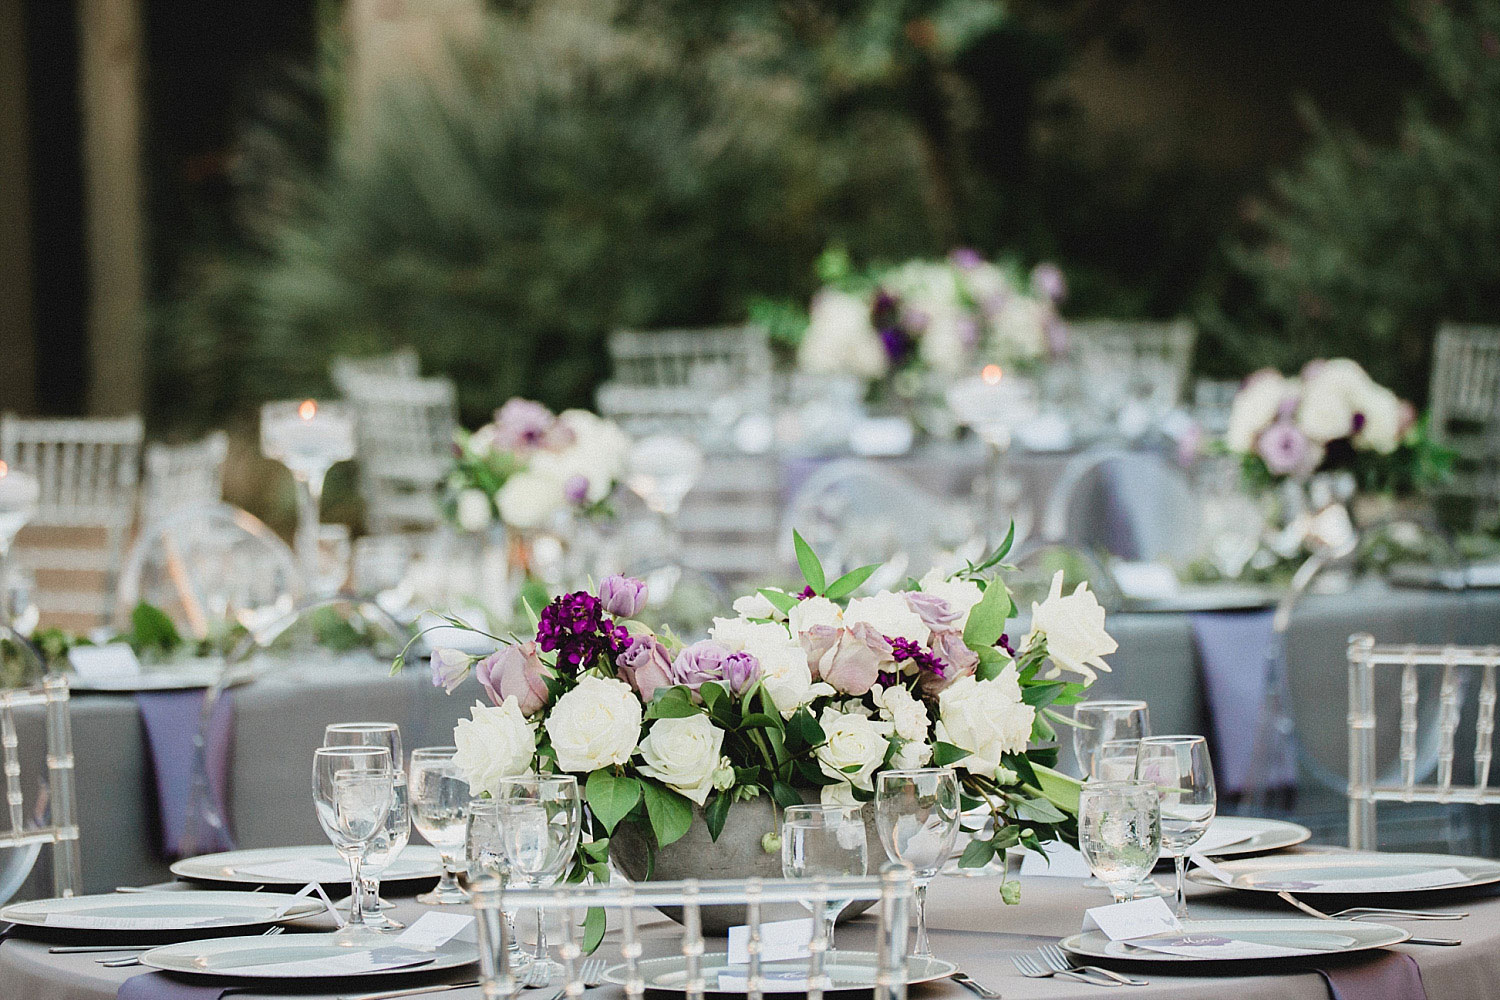 809 at Vickery wedding purple and lavender flowers in concrete boat vases and clear chairs